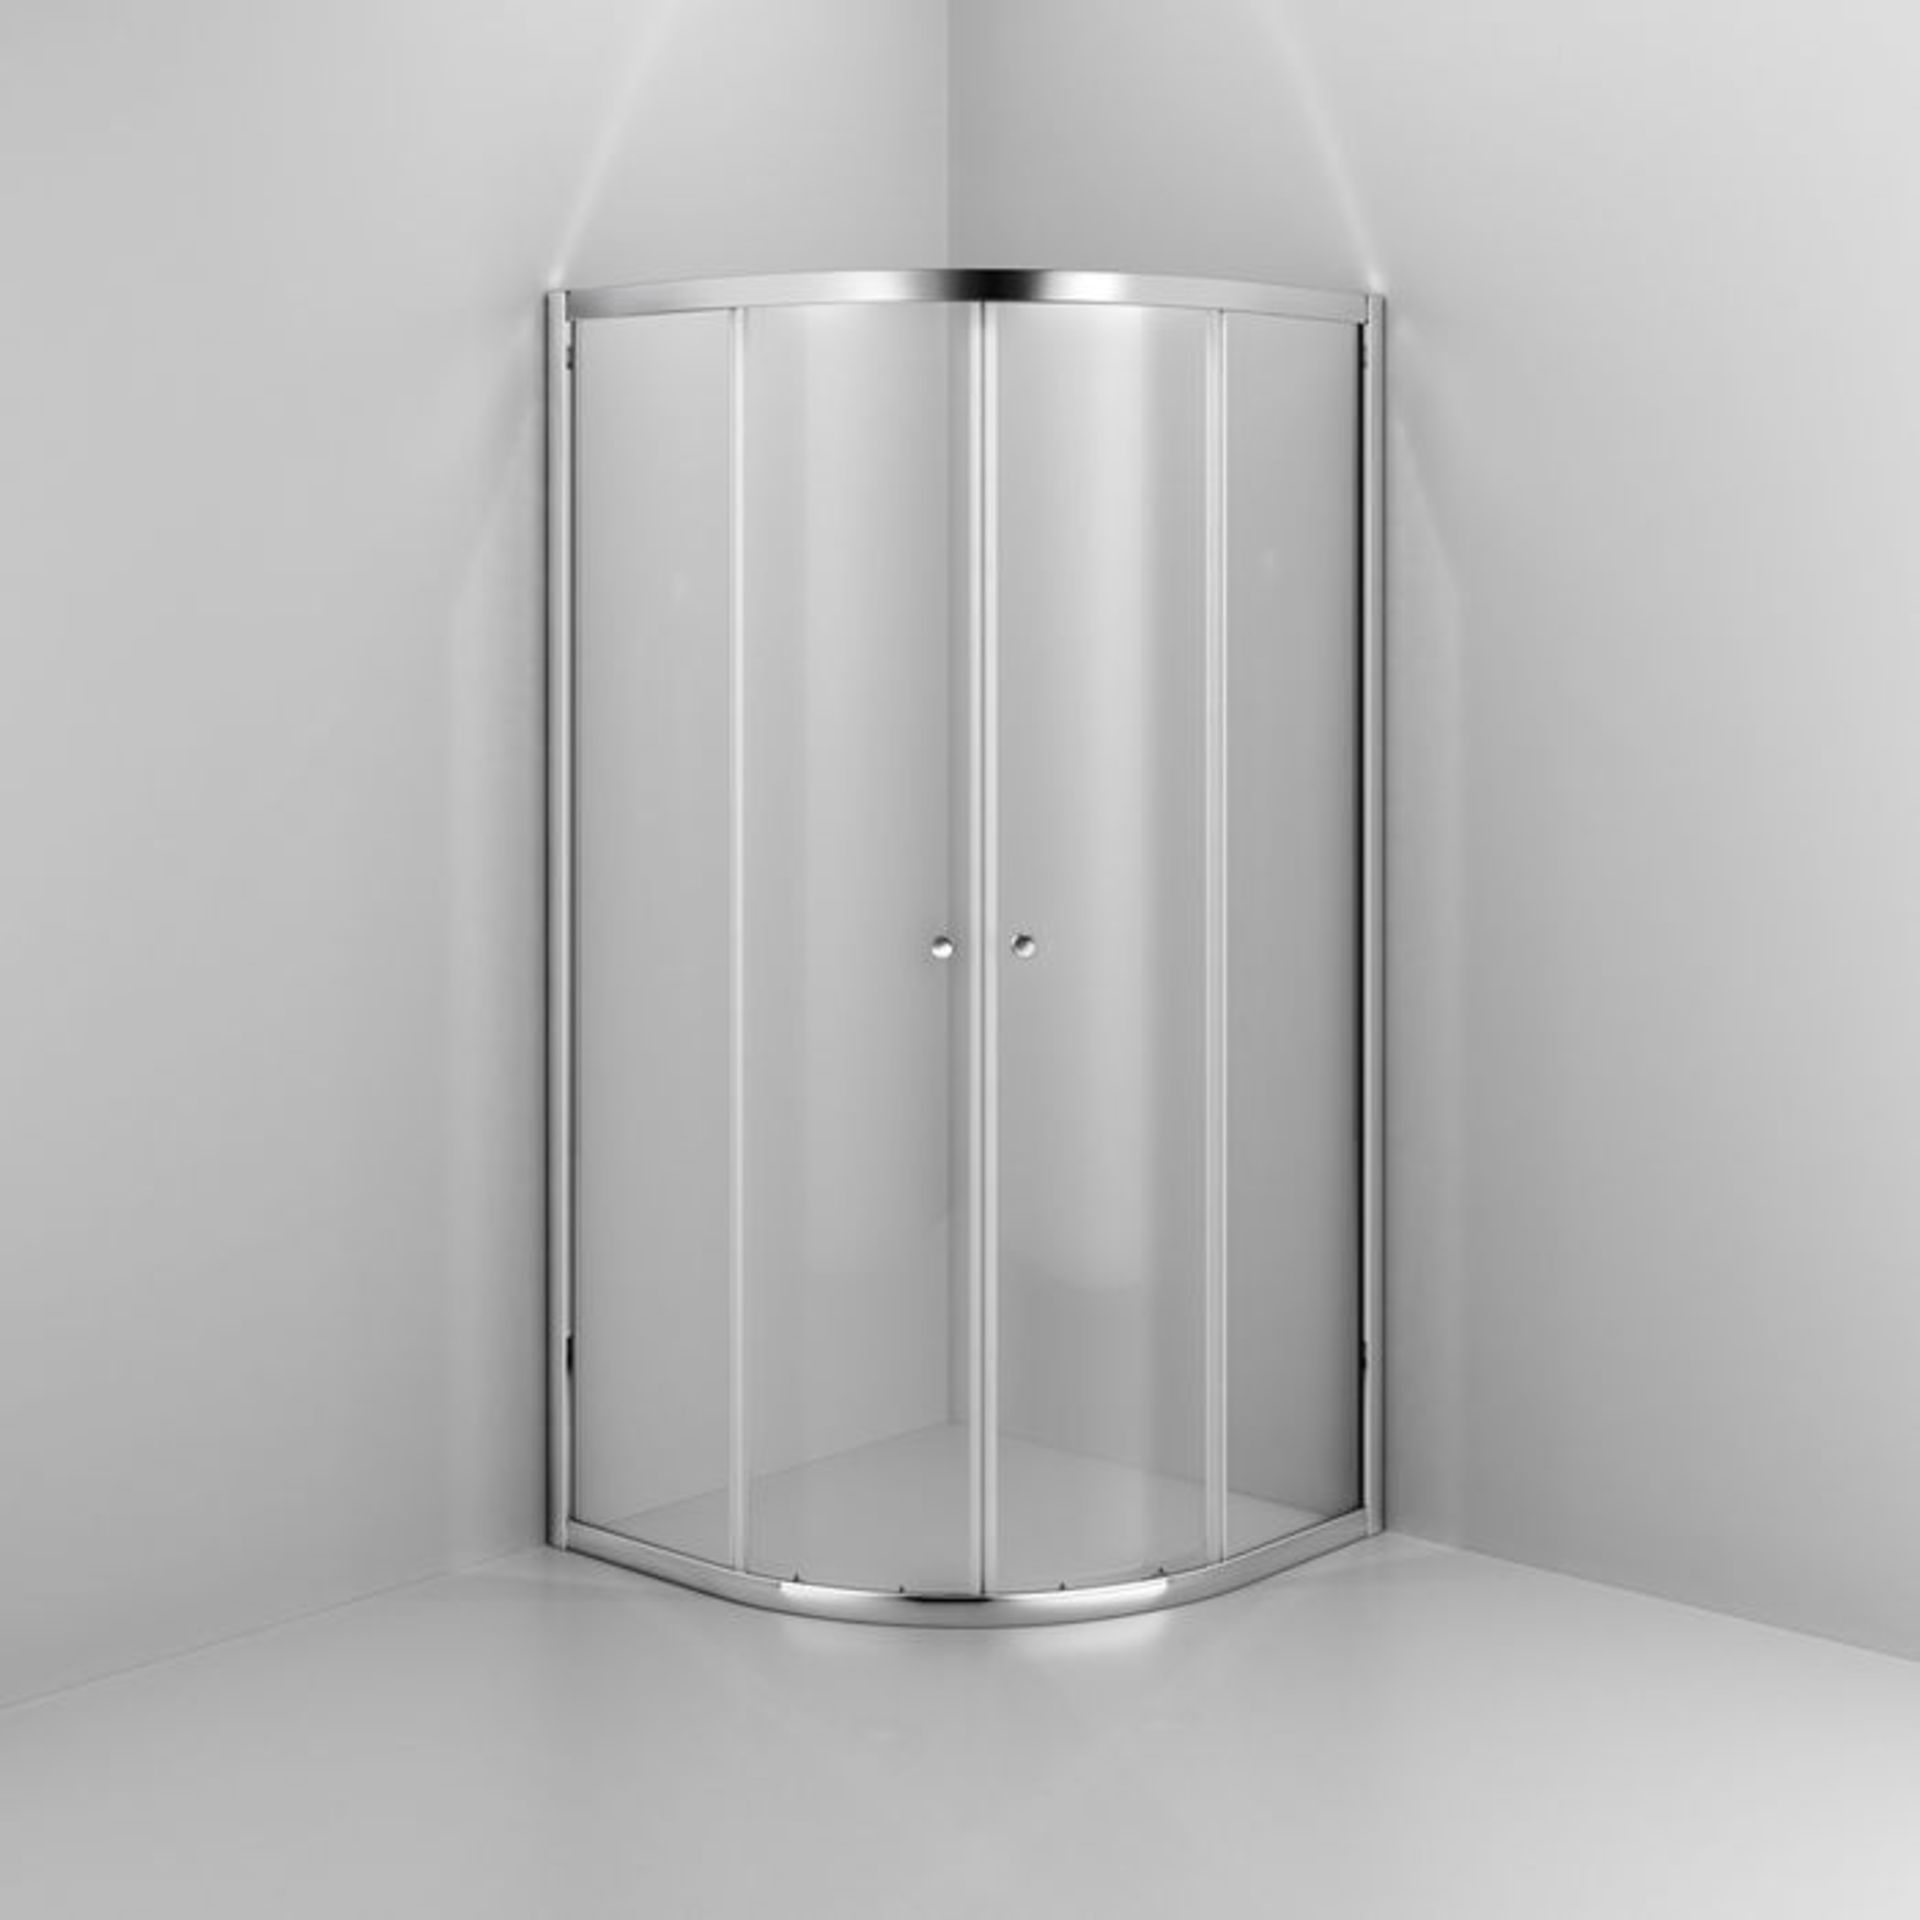 (G44) 800x800mm - Elements Quadrant Shower Enclosure RRP £199.99 4mm Safety Glass Fully waterproof - Image 5 of 6